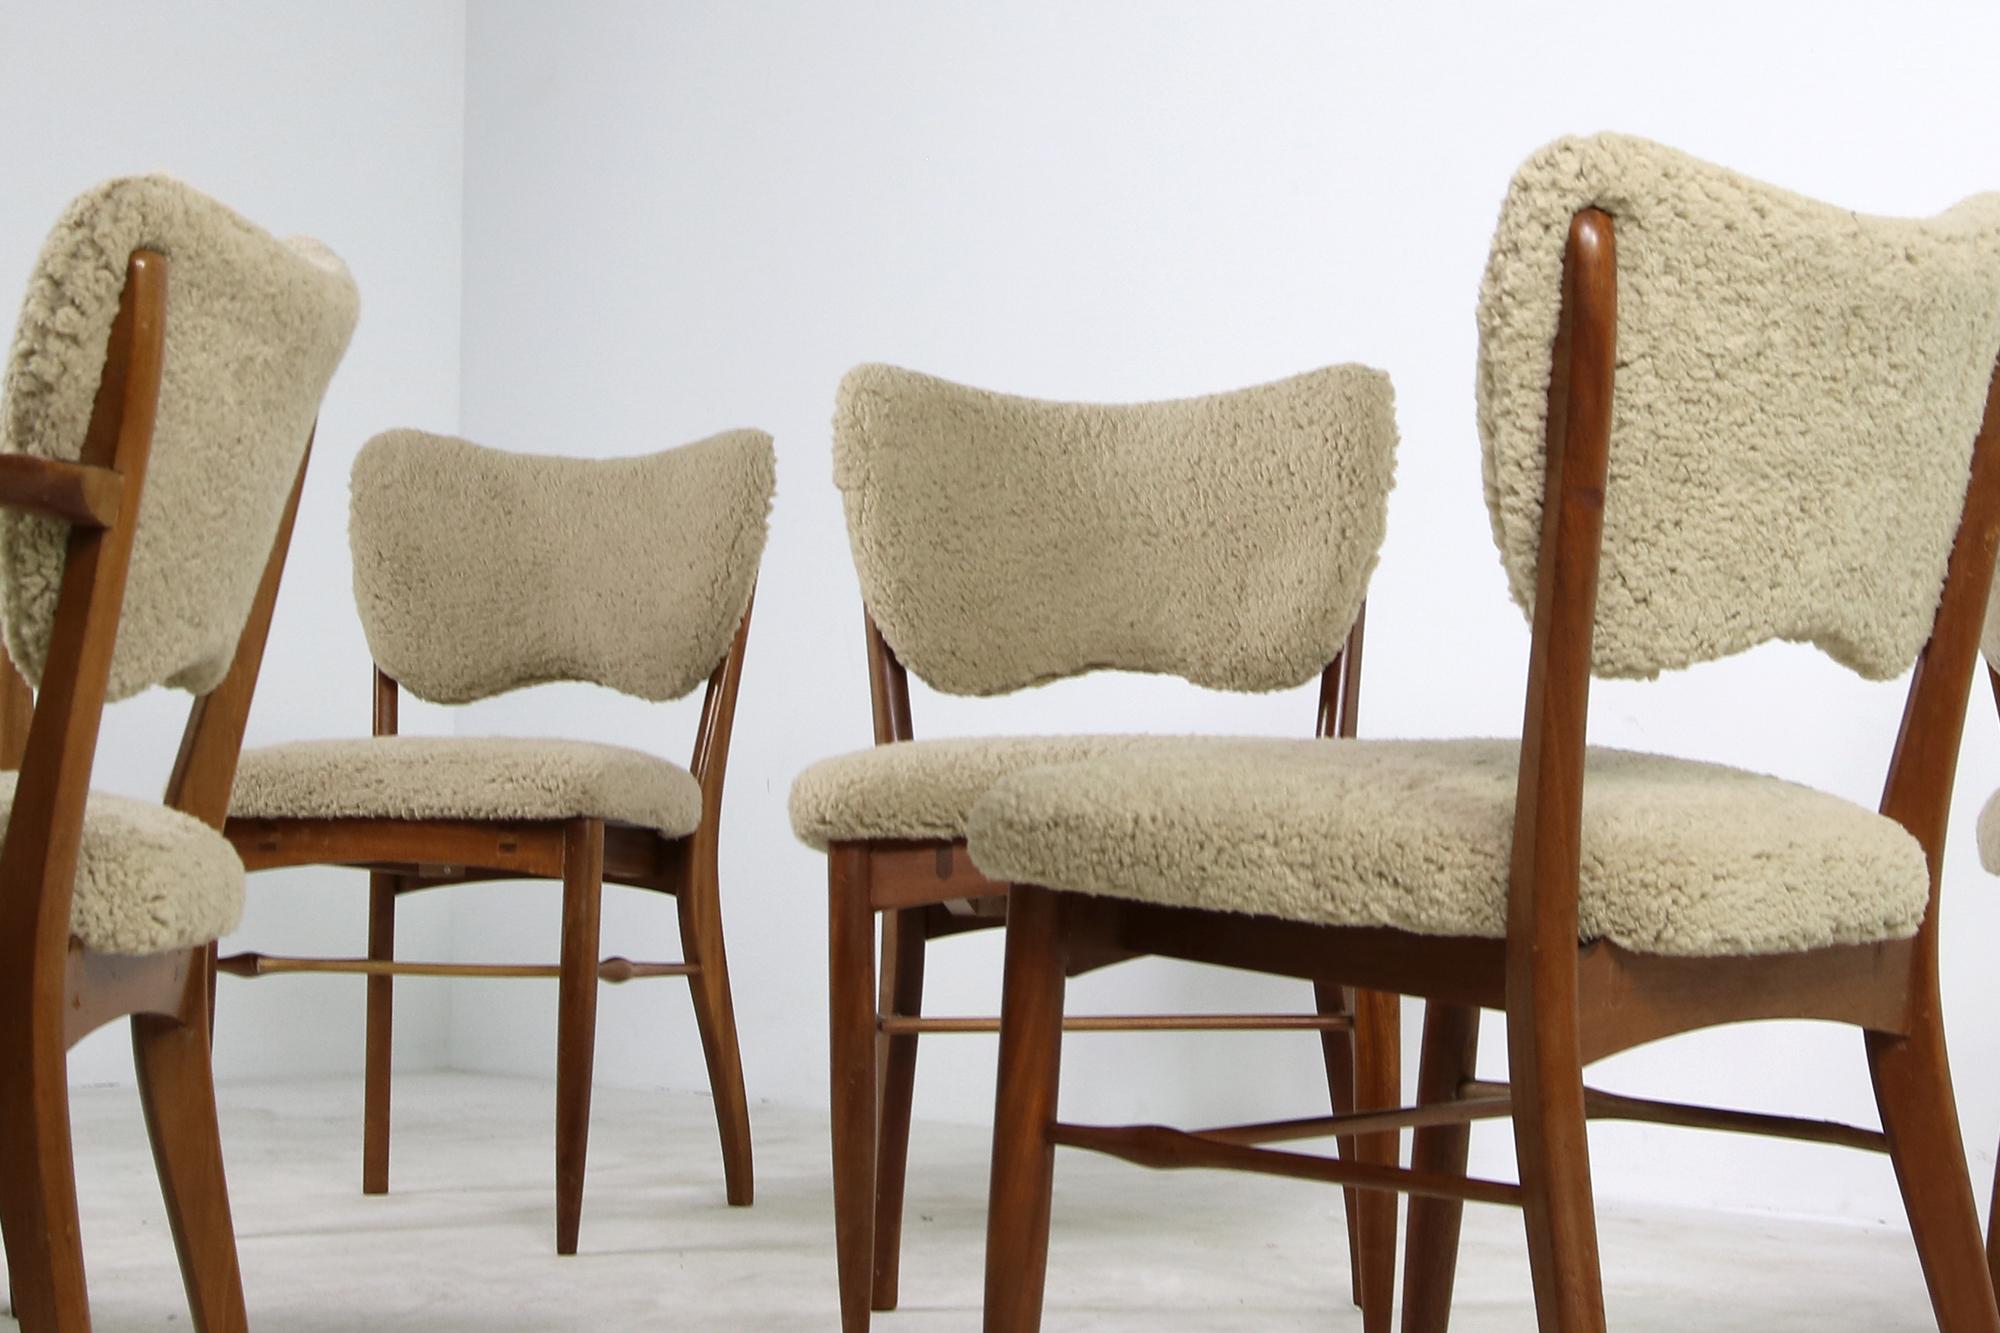 Beautiful set of (6) six rare - in that style unique - 1950s dining room chairs, 2x chairs with armrest, 4x armless chairs. Reupholstered in a super soft teddy fur fabric, like sheepskin but a cotton mix fabric, soft to the touch. The base is made